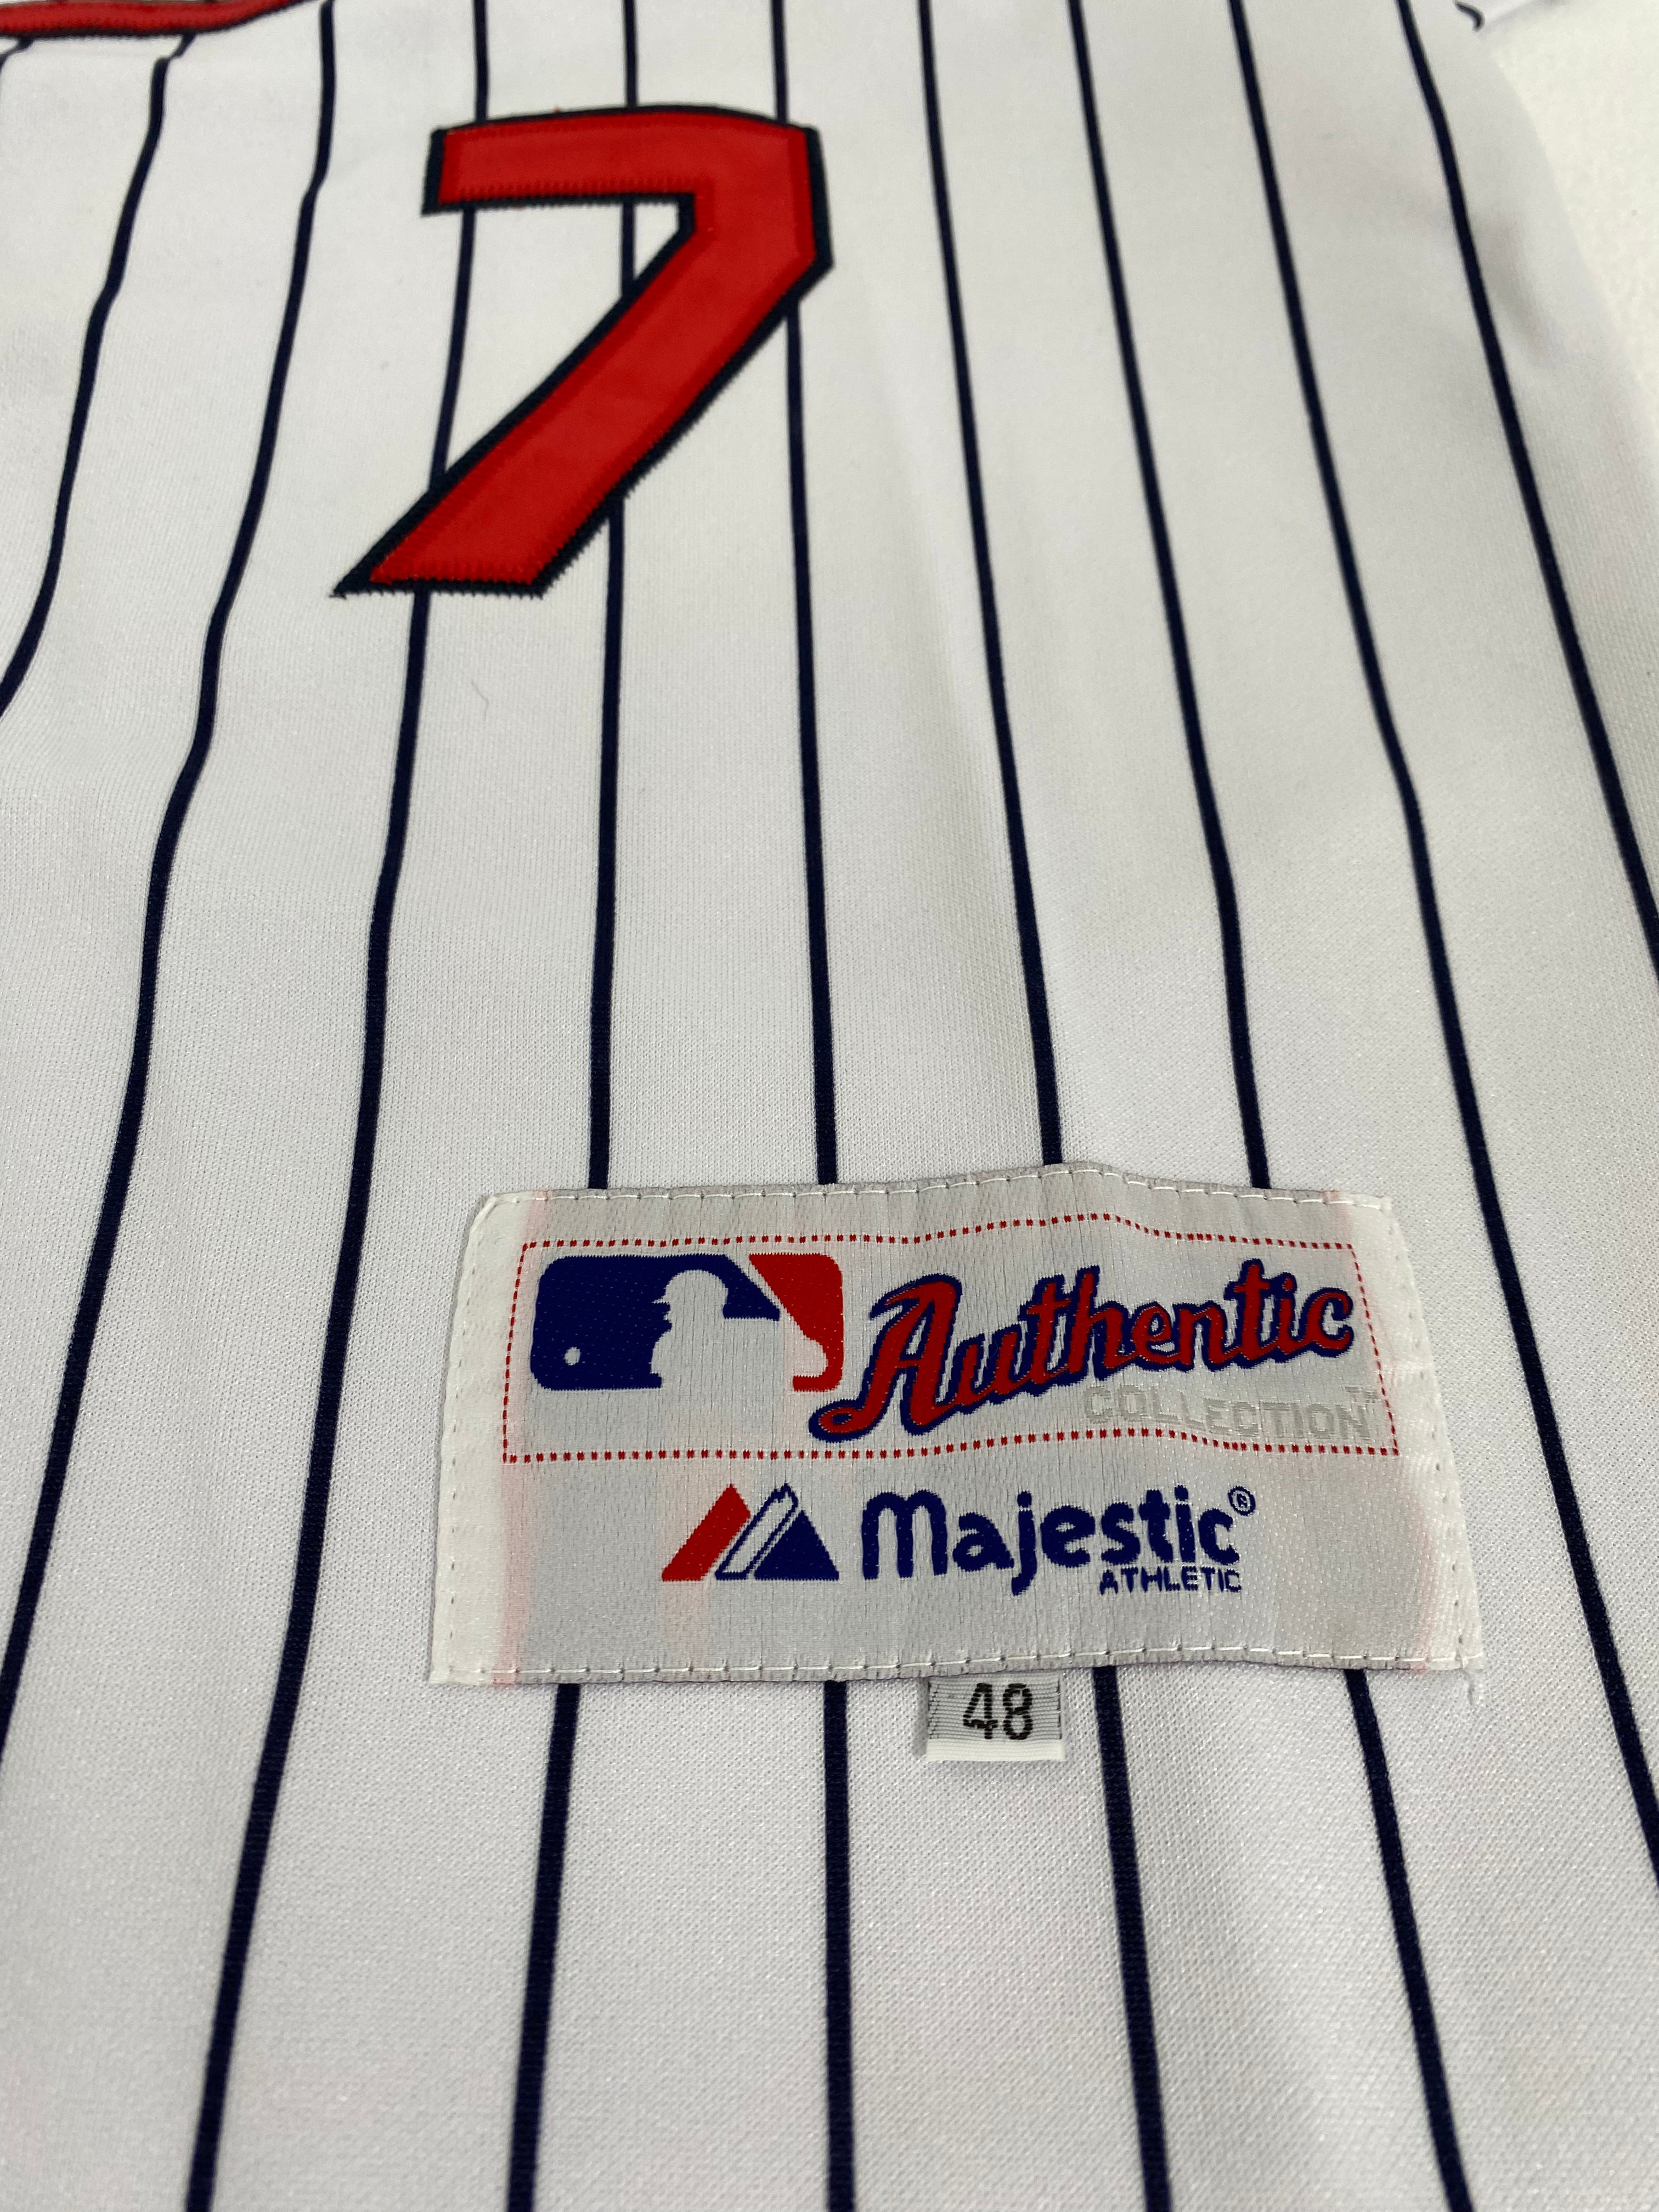 MINNESOTA TWINS JOE MAUER INAUGURAL SEASON 2010 TARGET FIELD JERSEY! -  NICE! - RARE! - SIZE 48 - MAJESTIC AUTHENTIC COLLECTION! - MN TWINS RETIRED  #7 - SEE PICTURES!